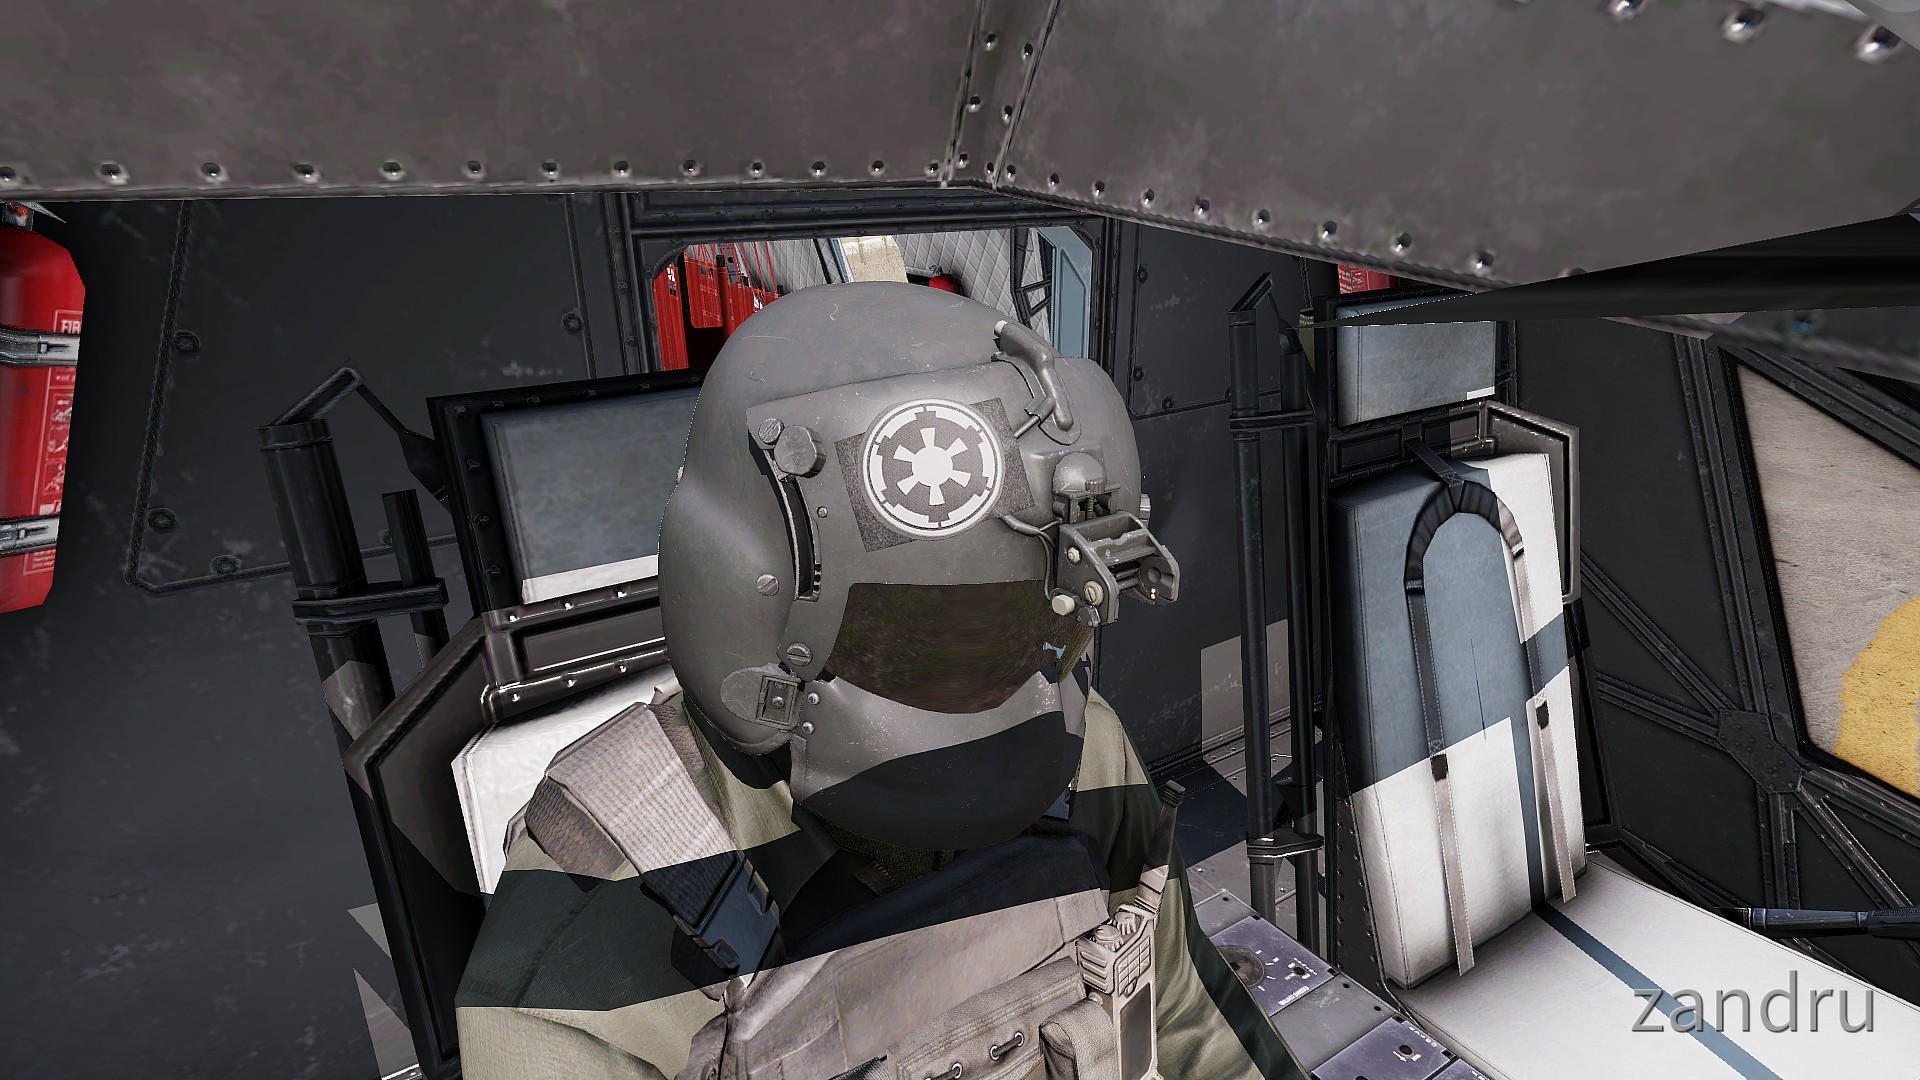 In Arma you can be an imperial Pilot now.